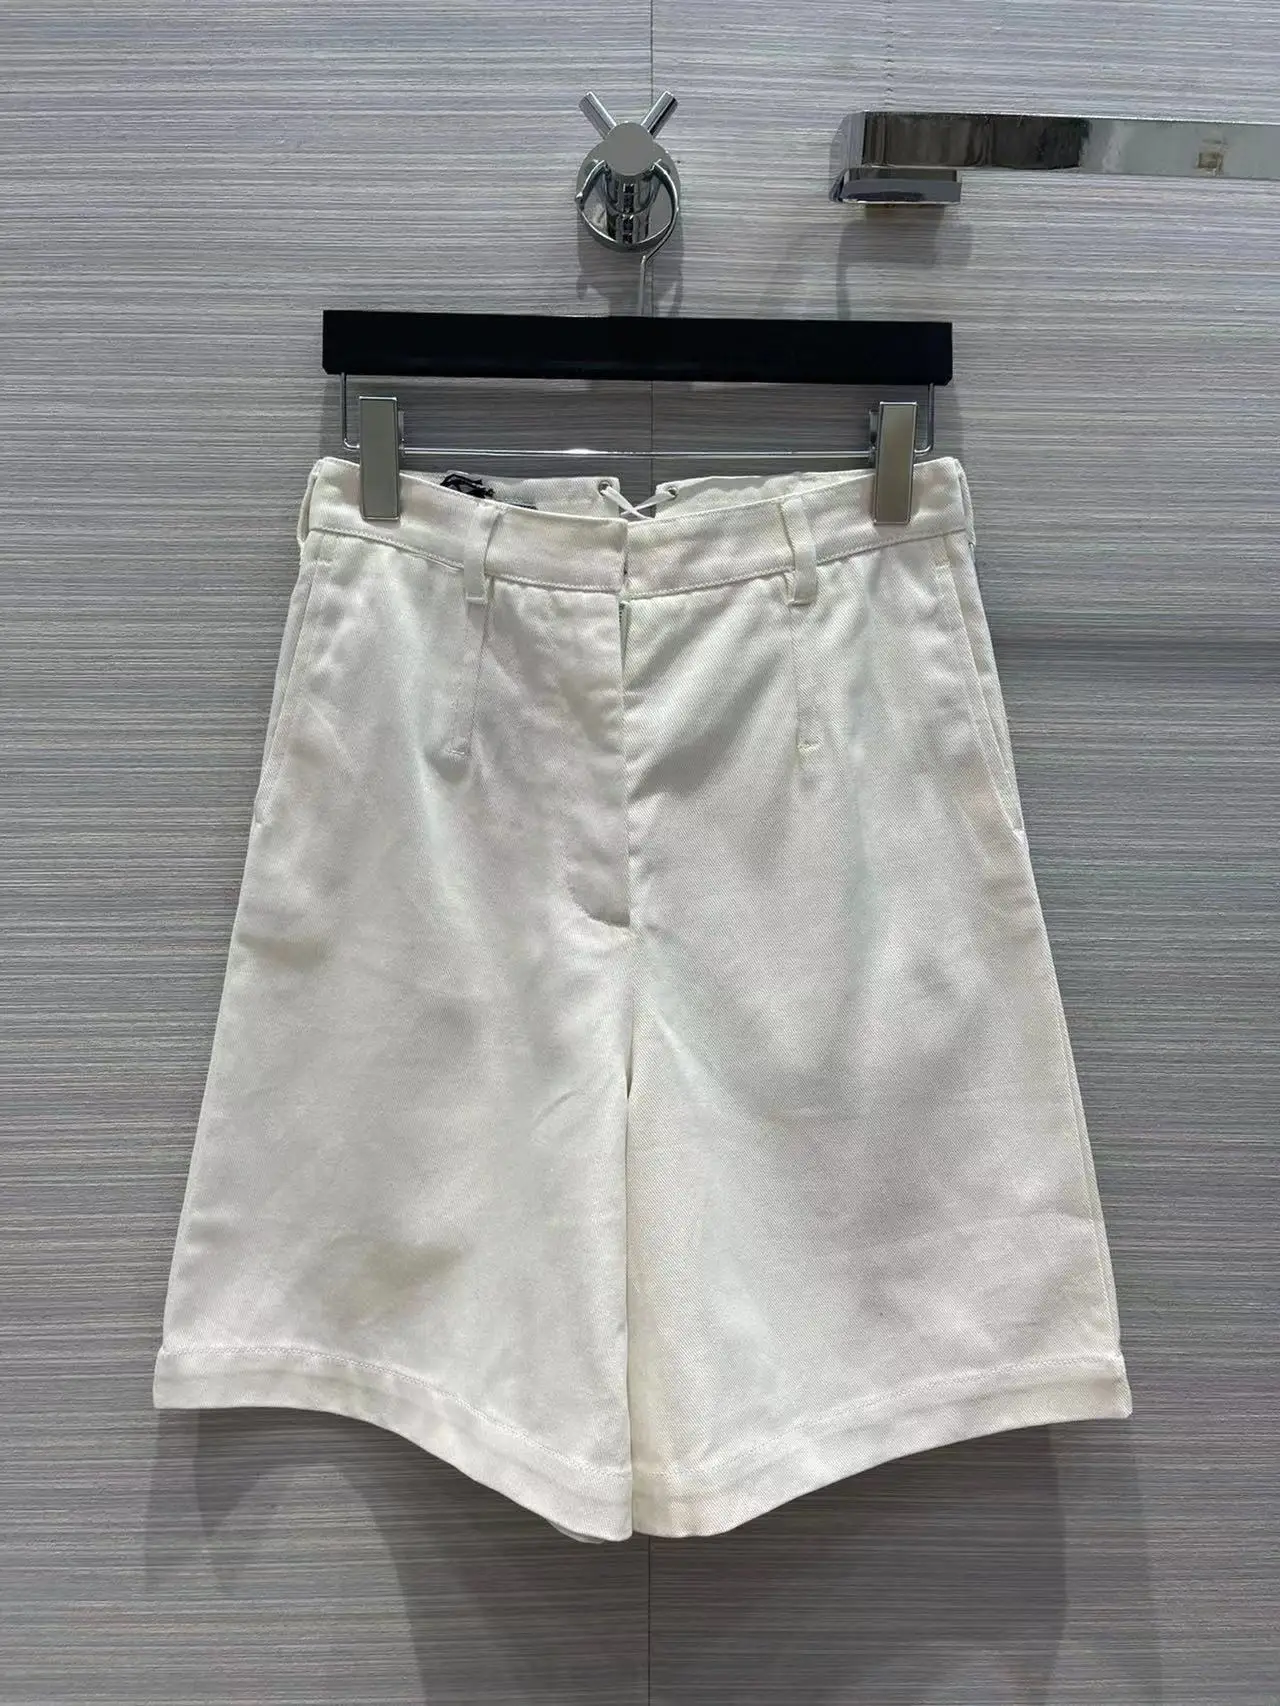 High Quality Women's Shorts Casual Solid White / Black Vacation Fashion Runway Summer 2022 New Shorts